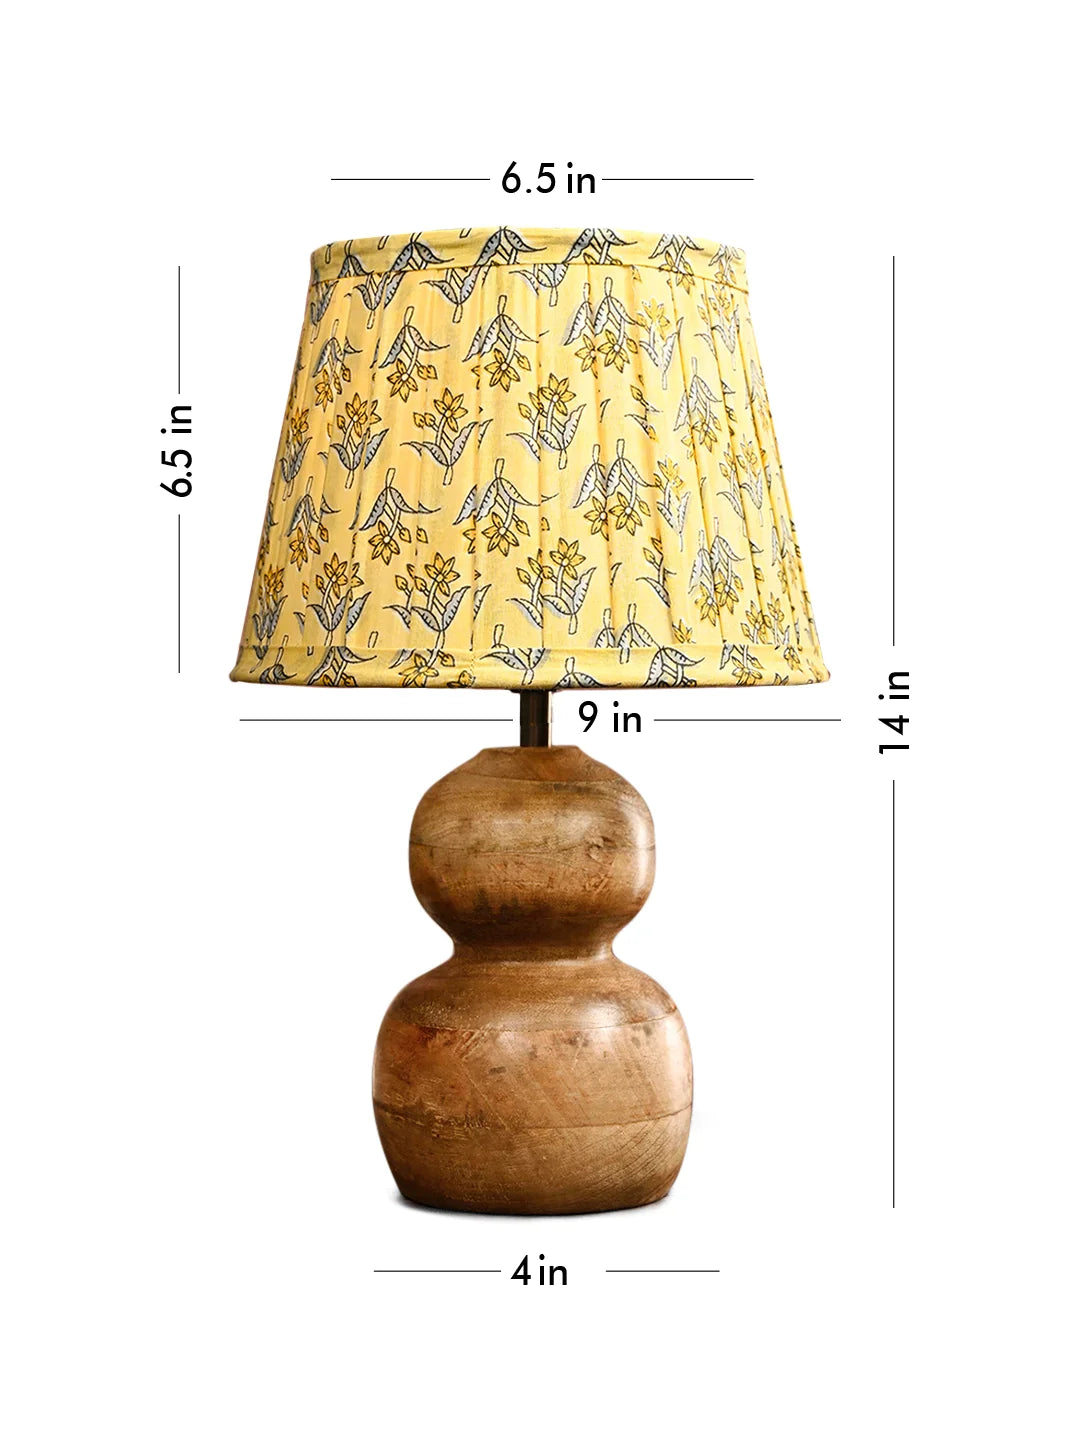 Wooden Double Dome Table Lamp with Pleeted Colorful Lemon Taper Shade